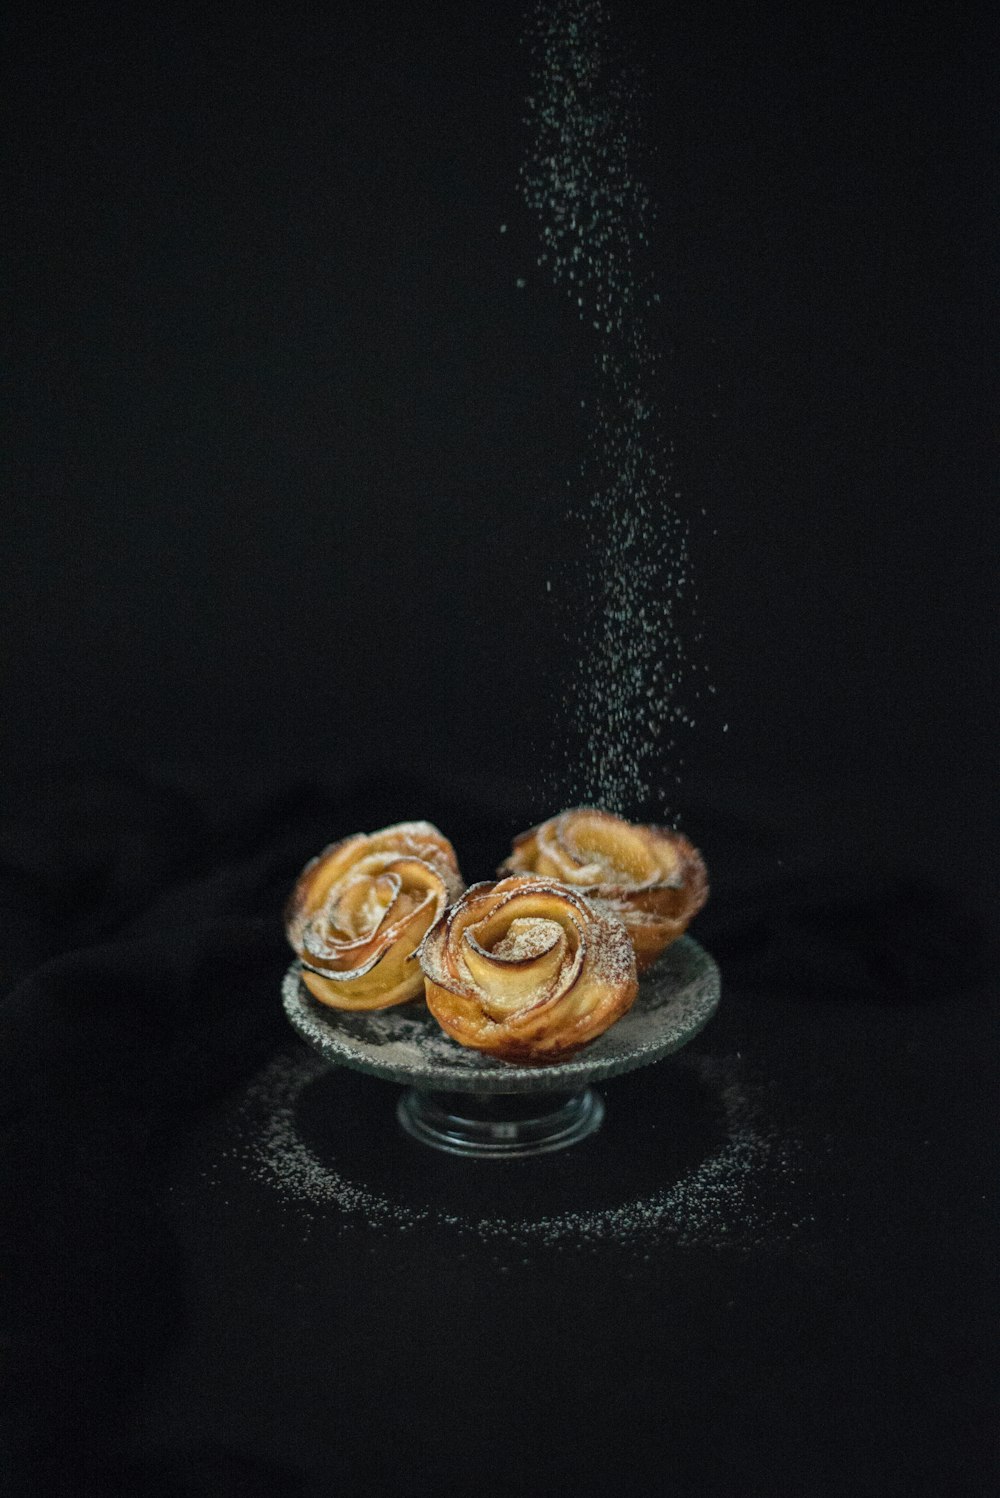 a plate of cinnamon buns sprinkled with powder